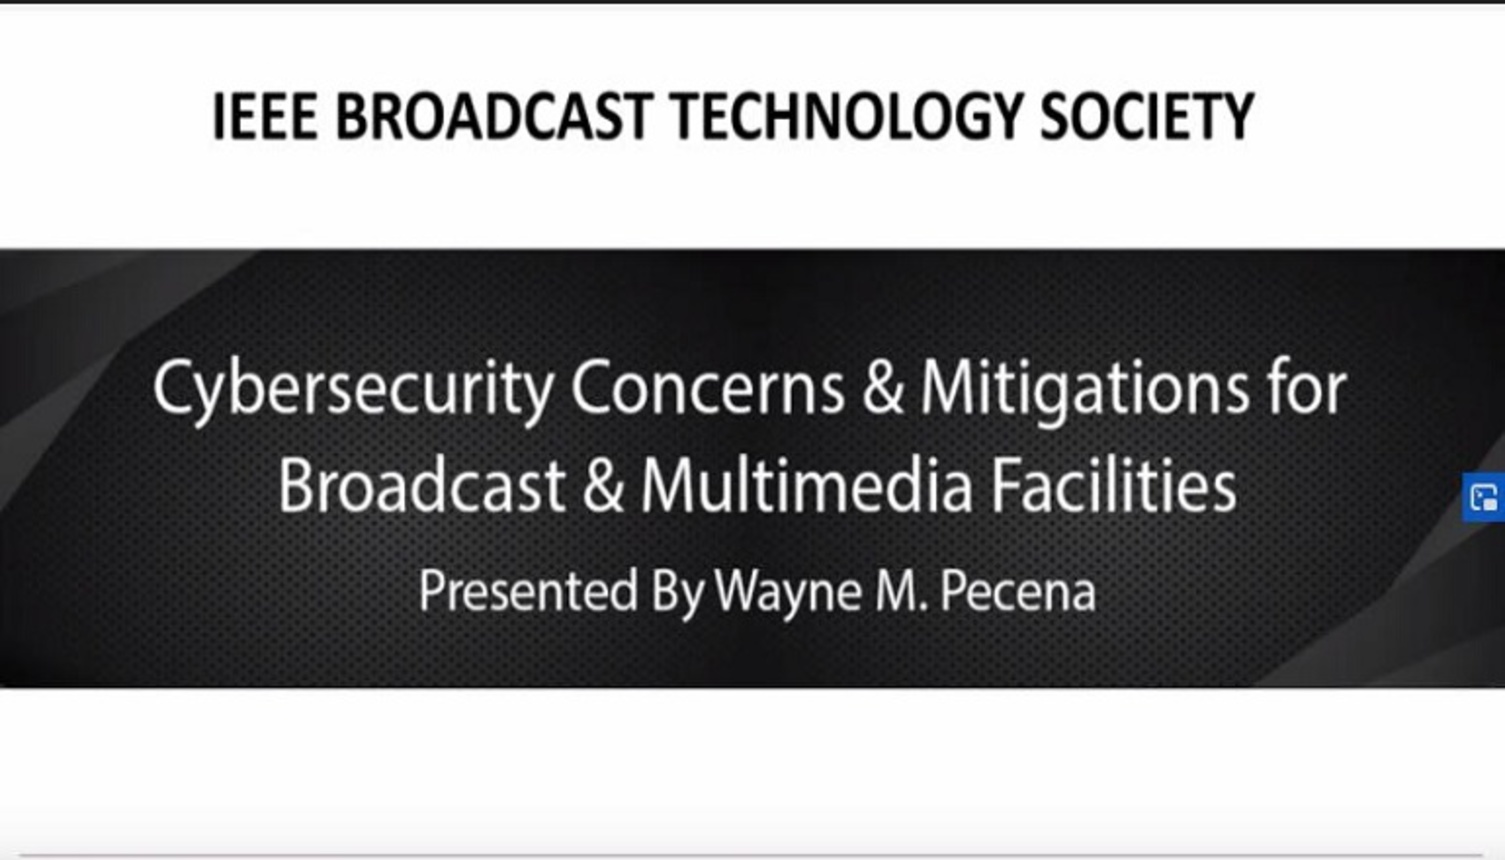 Cybersecurity Concerns and Mitigations for Broadcast and Multimedia Facilities